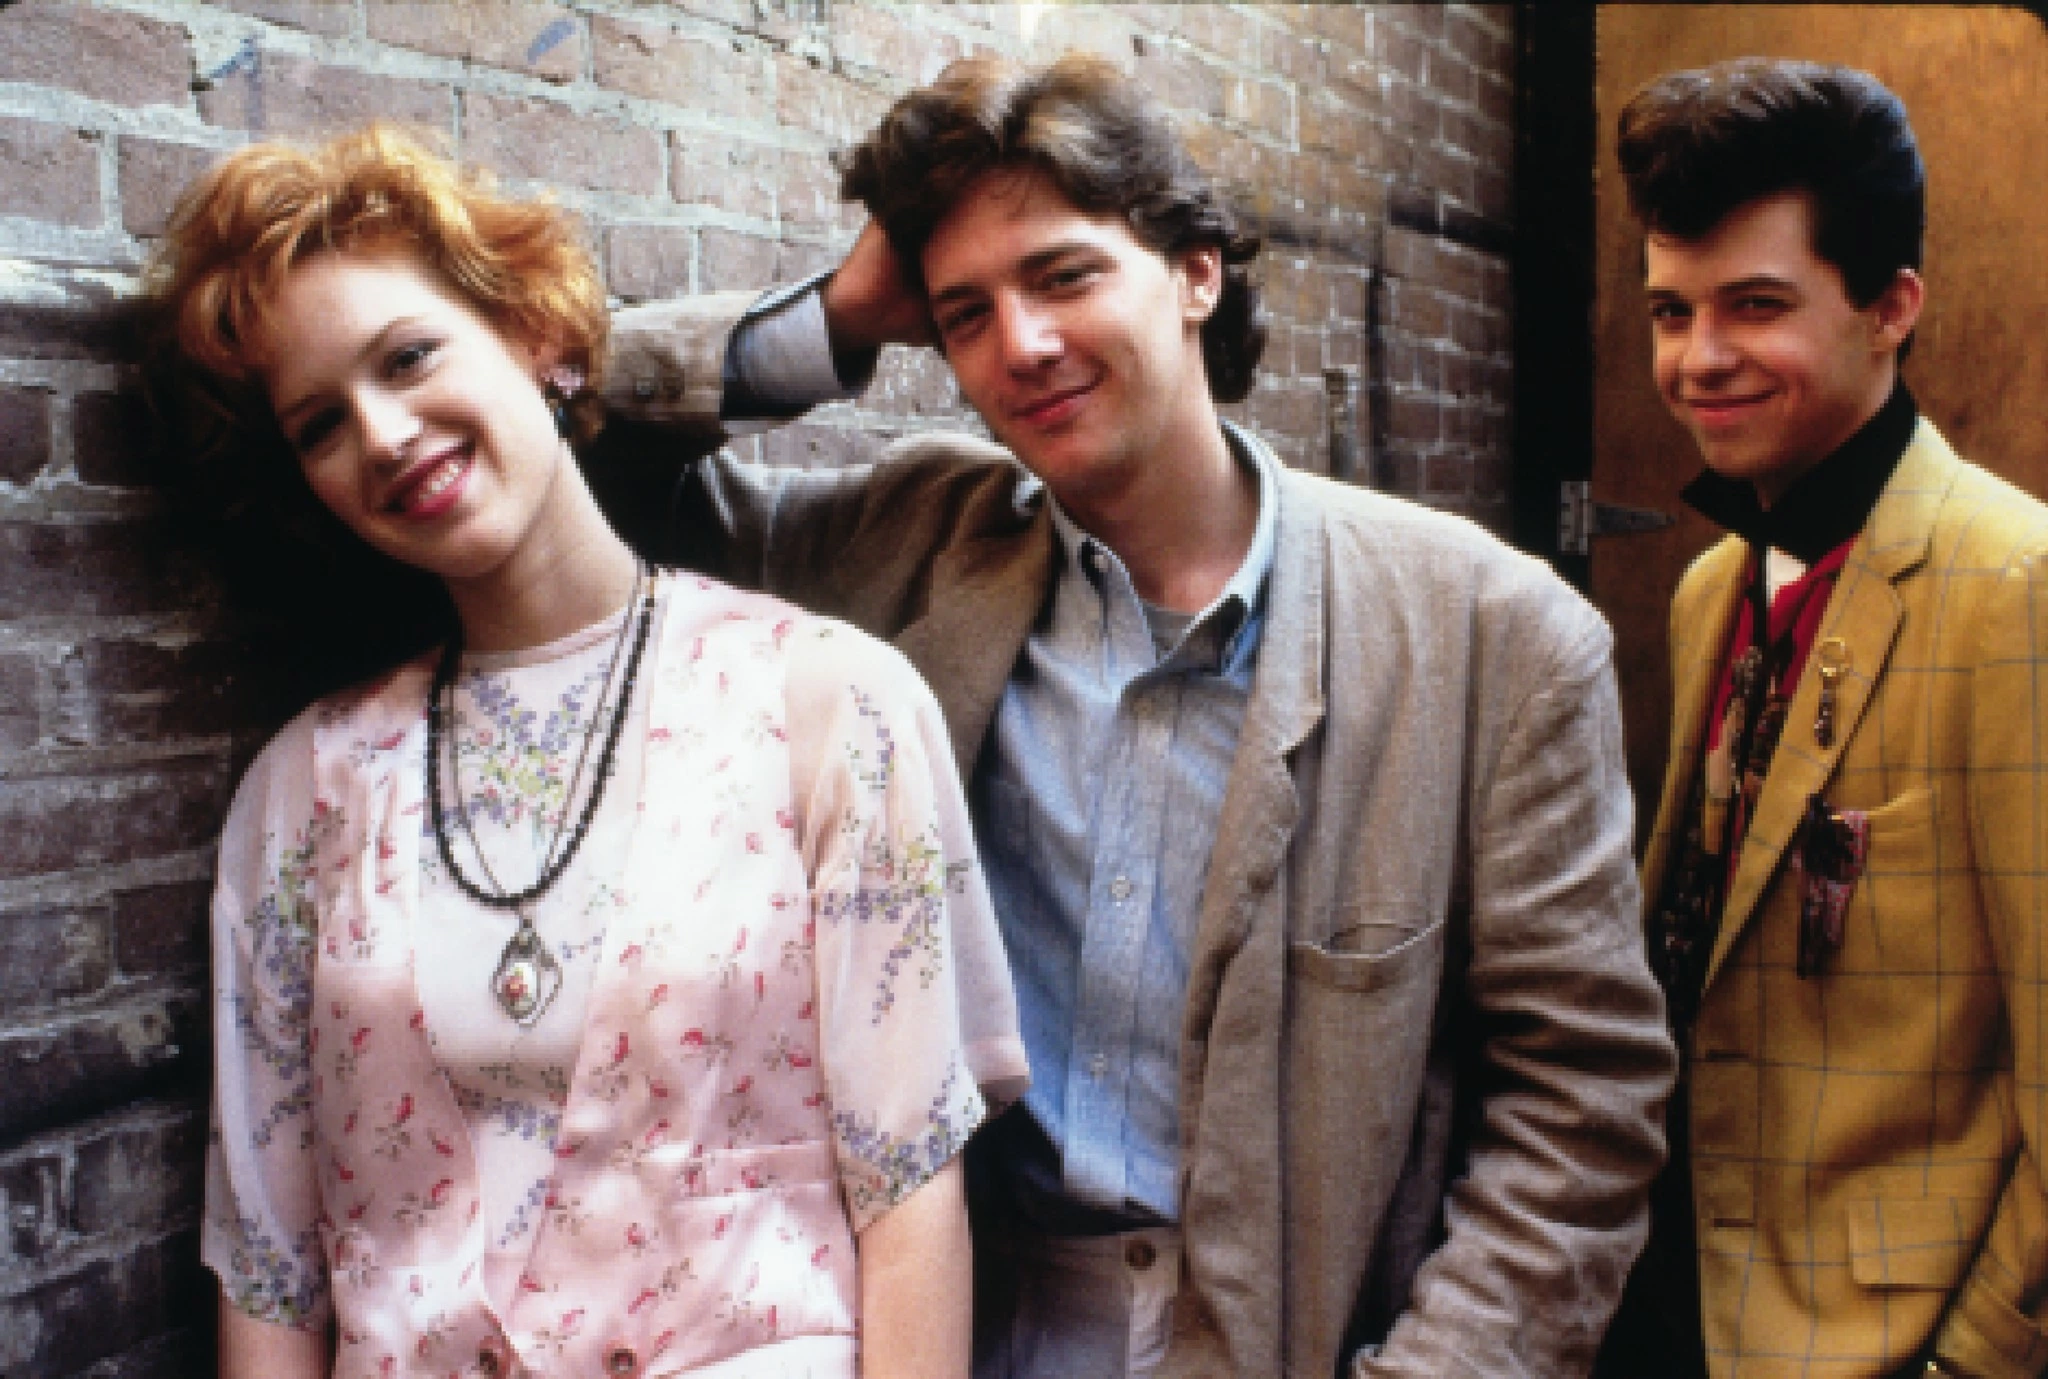 Pretty in Pink (1986):